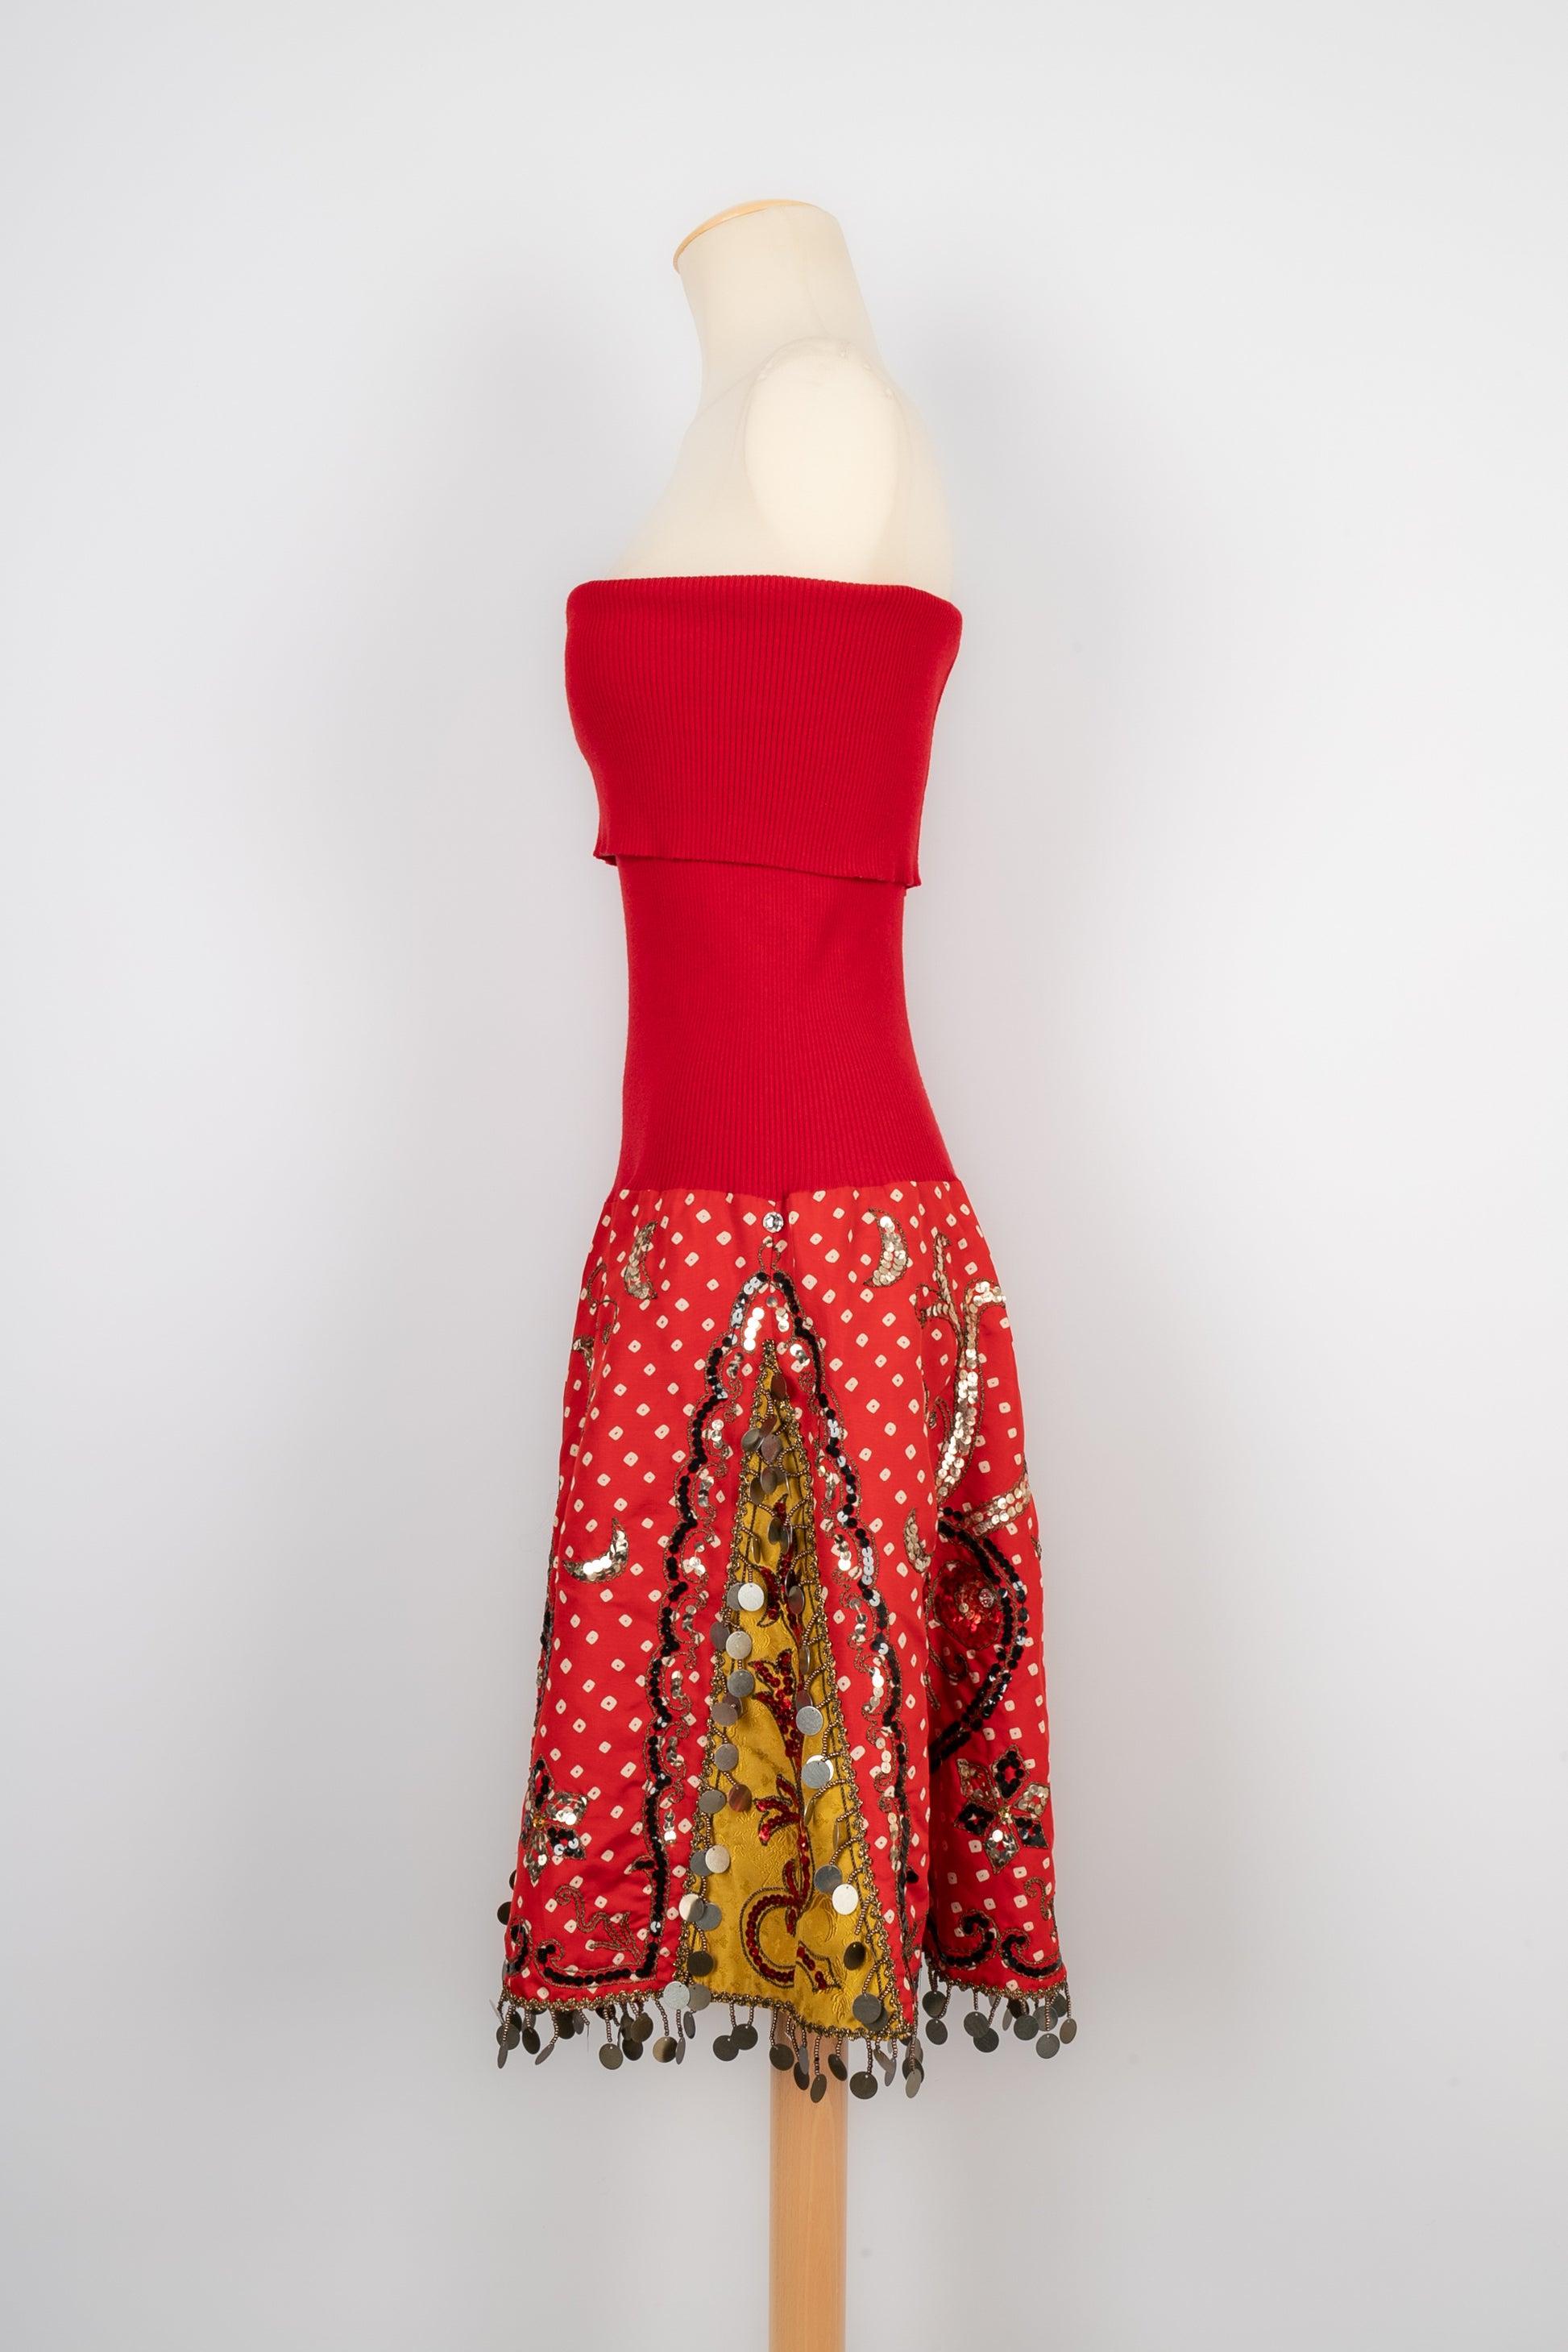 Christian Dior Red Mesh and Silk Skirt/dress, 2002 For Sale 1